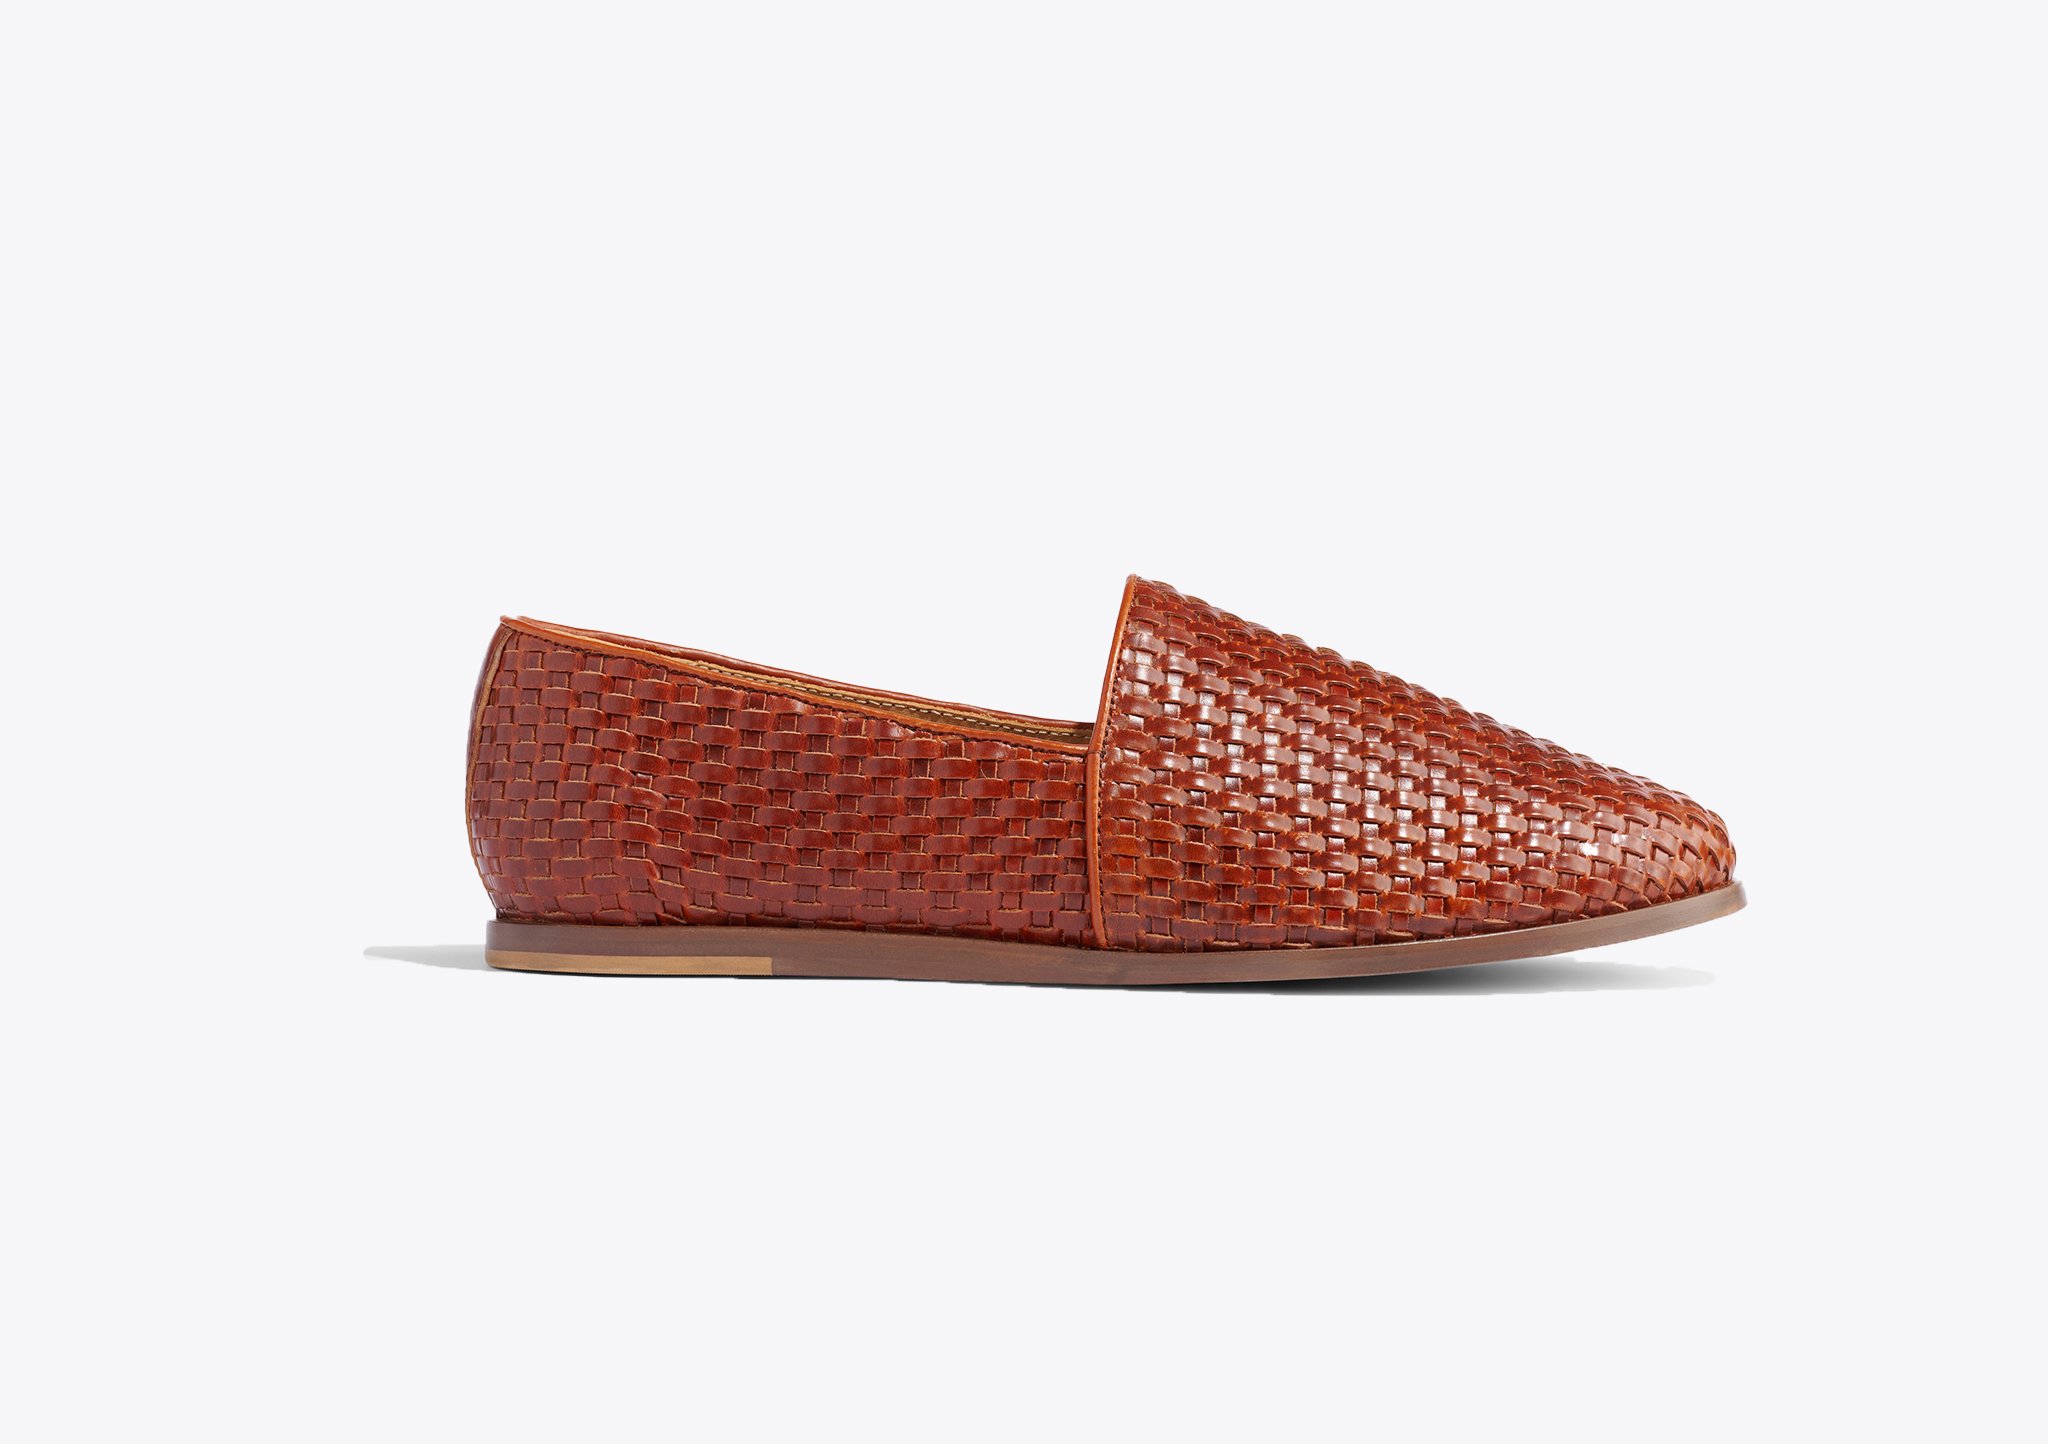 Nisolo Alejandro Woven Slip-On 2.0 Woven Brandy - Every Nisolo product is built on the foundation of comfort, function, and design. 